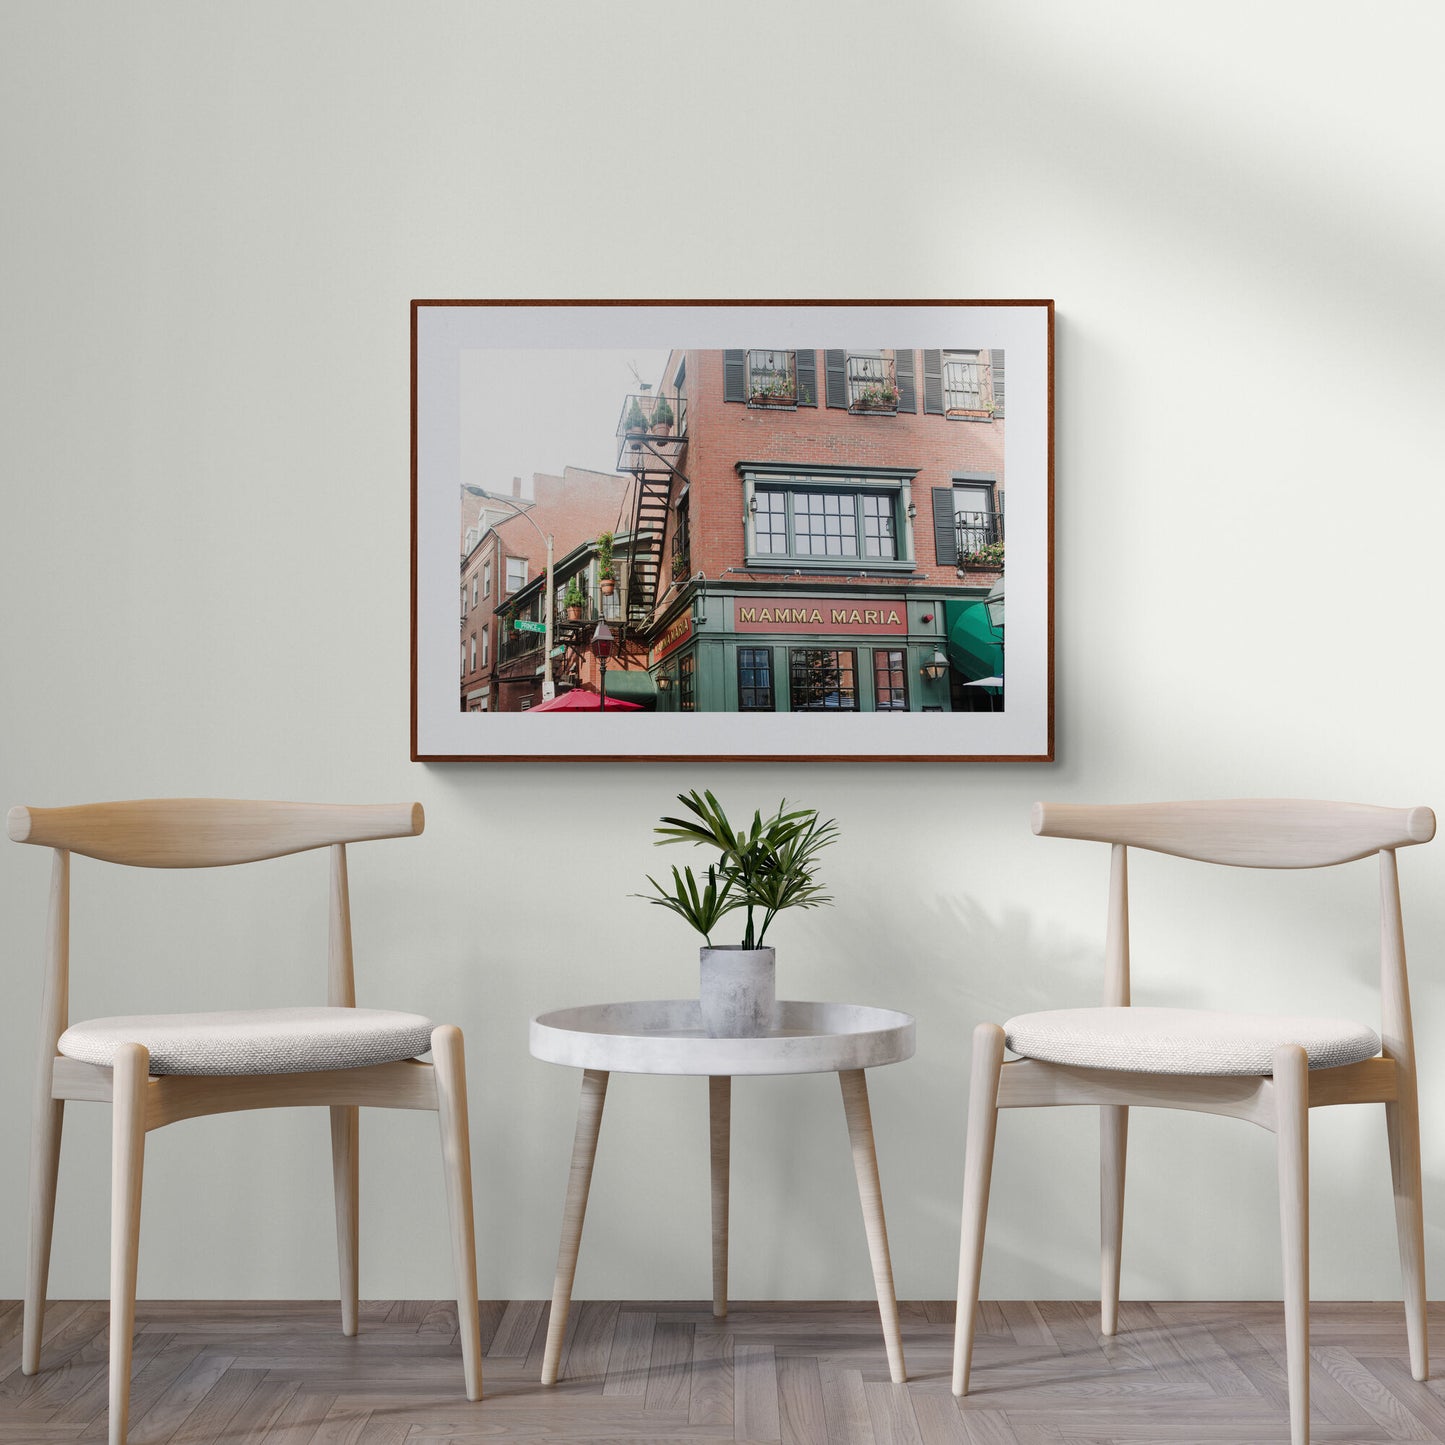 Photograph of Mamma Maria in Boston North End as Wall Art for Home Decor